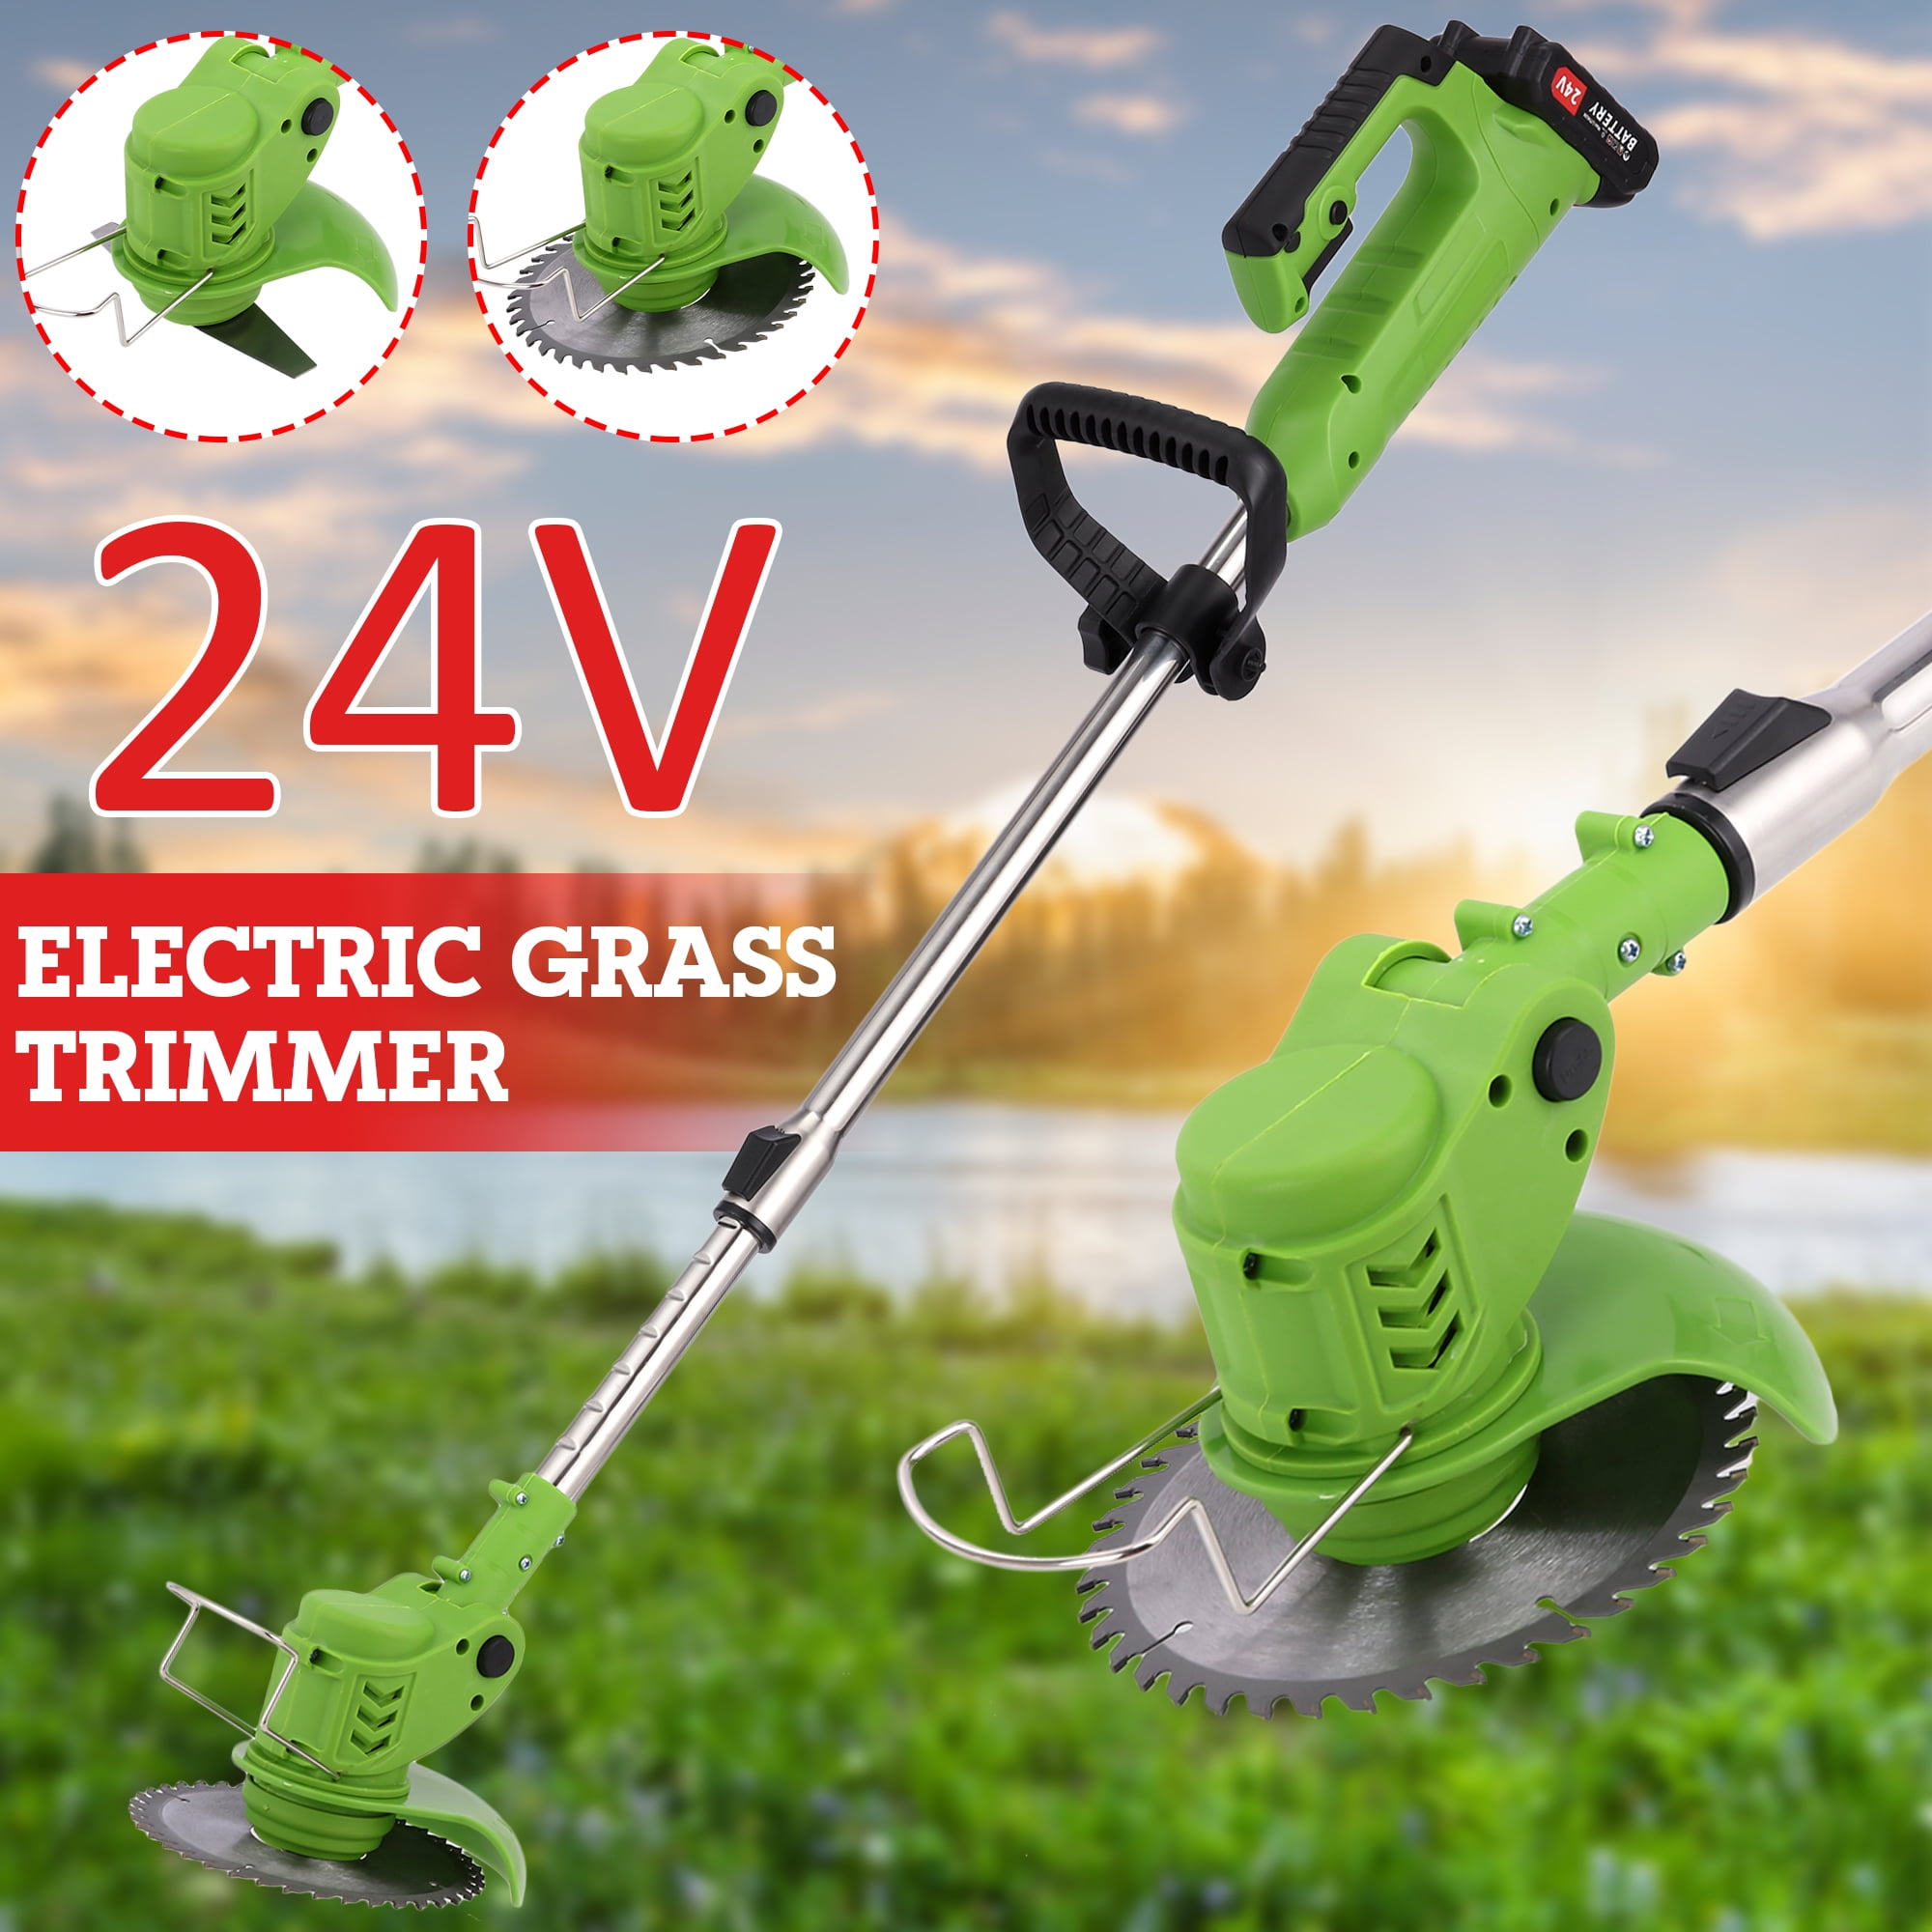 GardenJoy String Trimmer,12V Cordless Trimmer Lawn with Cutting Blade Adjustable Handle and Height for Weed Wacker,Yard and Garden 2.0Ah Lithium-ion Edger Battery Powered & Electric Grass Trimmer 